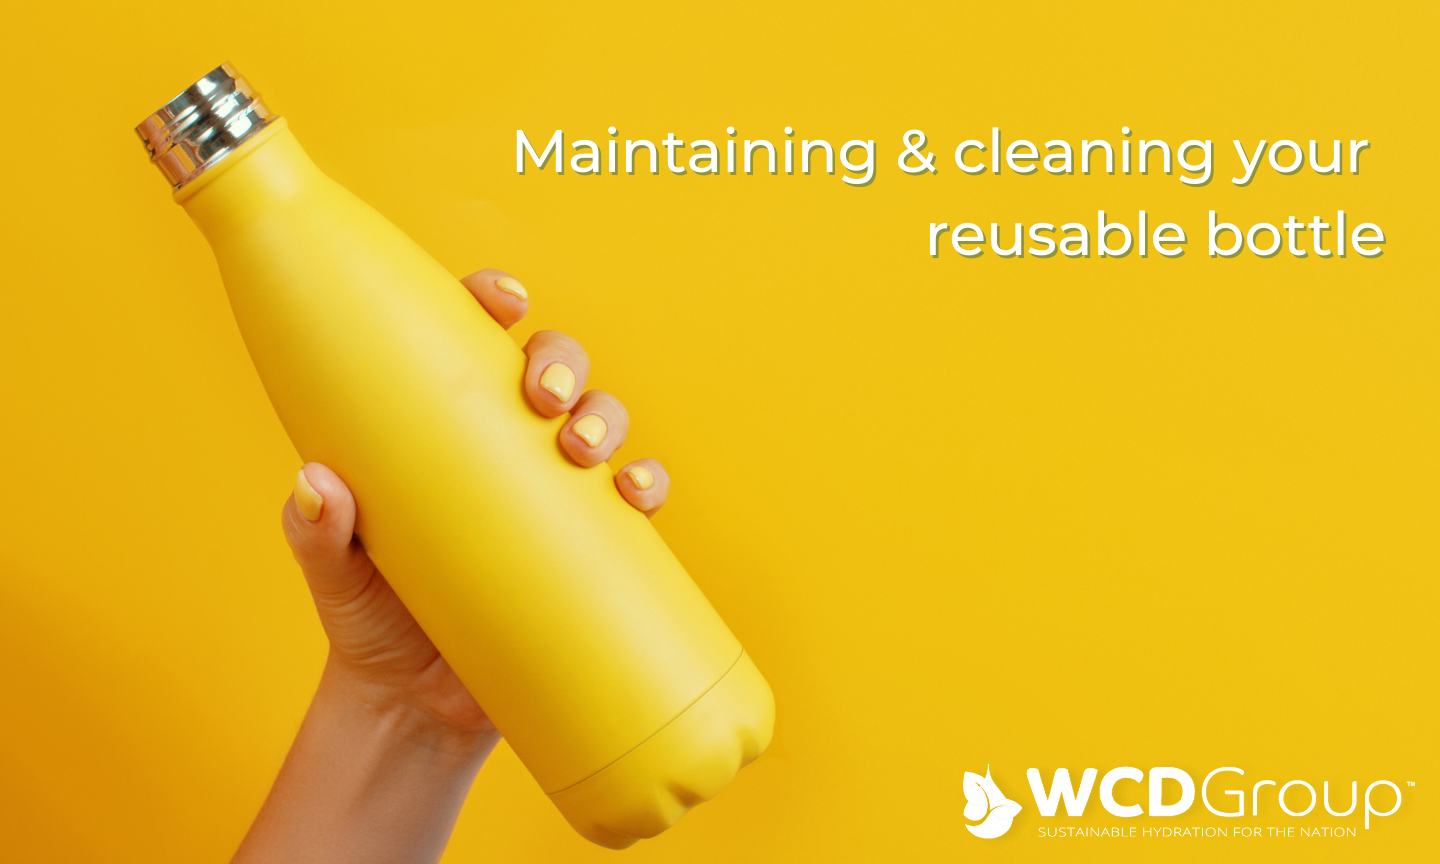 How to properly maintain and clean your reusable water bottle